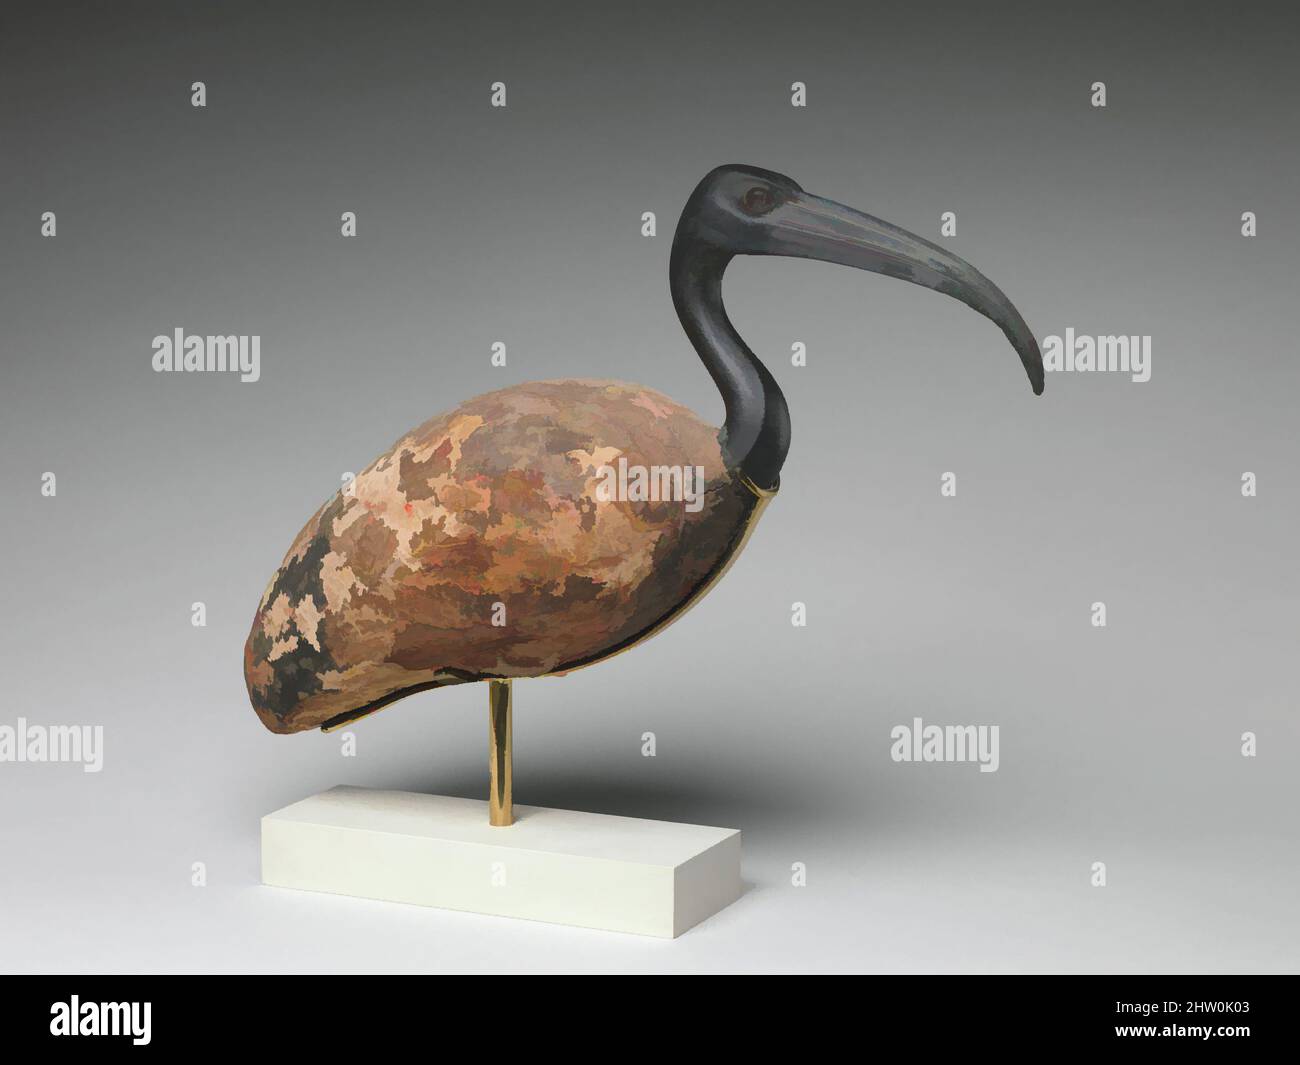 Art inspired by Ibis, Late Period–Ptolemaic Period, 600–30 B.C., From Egypt; Probably from Middle Egypt, Hermopolis (Ashmunein; Khemenu), Wood, gesso, linen, paint, bronze, glass (eyes), L. 47 cm (18 1/2 in.); W. 15.3 cm (6 in.); H. 33 cm (13 in.), The ibis was sacred to the god Thoth, Classic works modernized by Artotop with a splash of modernity. Shapes, color and value, eye-catching visual impact on art. Emotions through freedom of artworks in a contemporary way. A timeless message pursuing a wildly creative new direction. Artists turning to the digital medium and creating the Artotop NFT Stock Photo